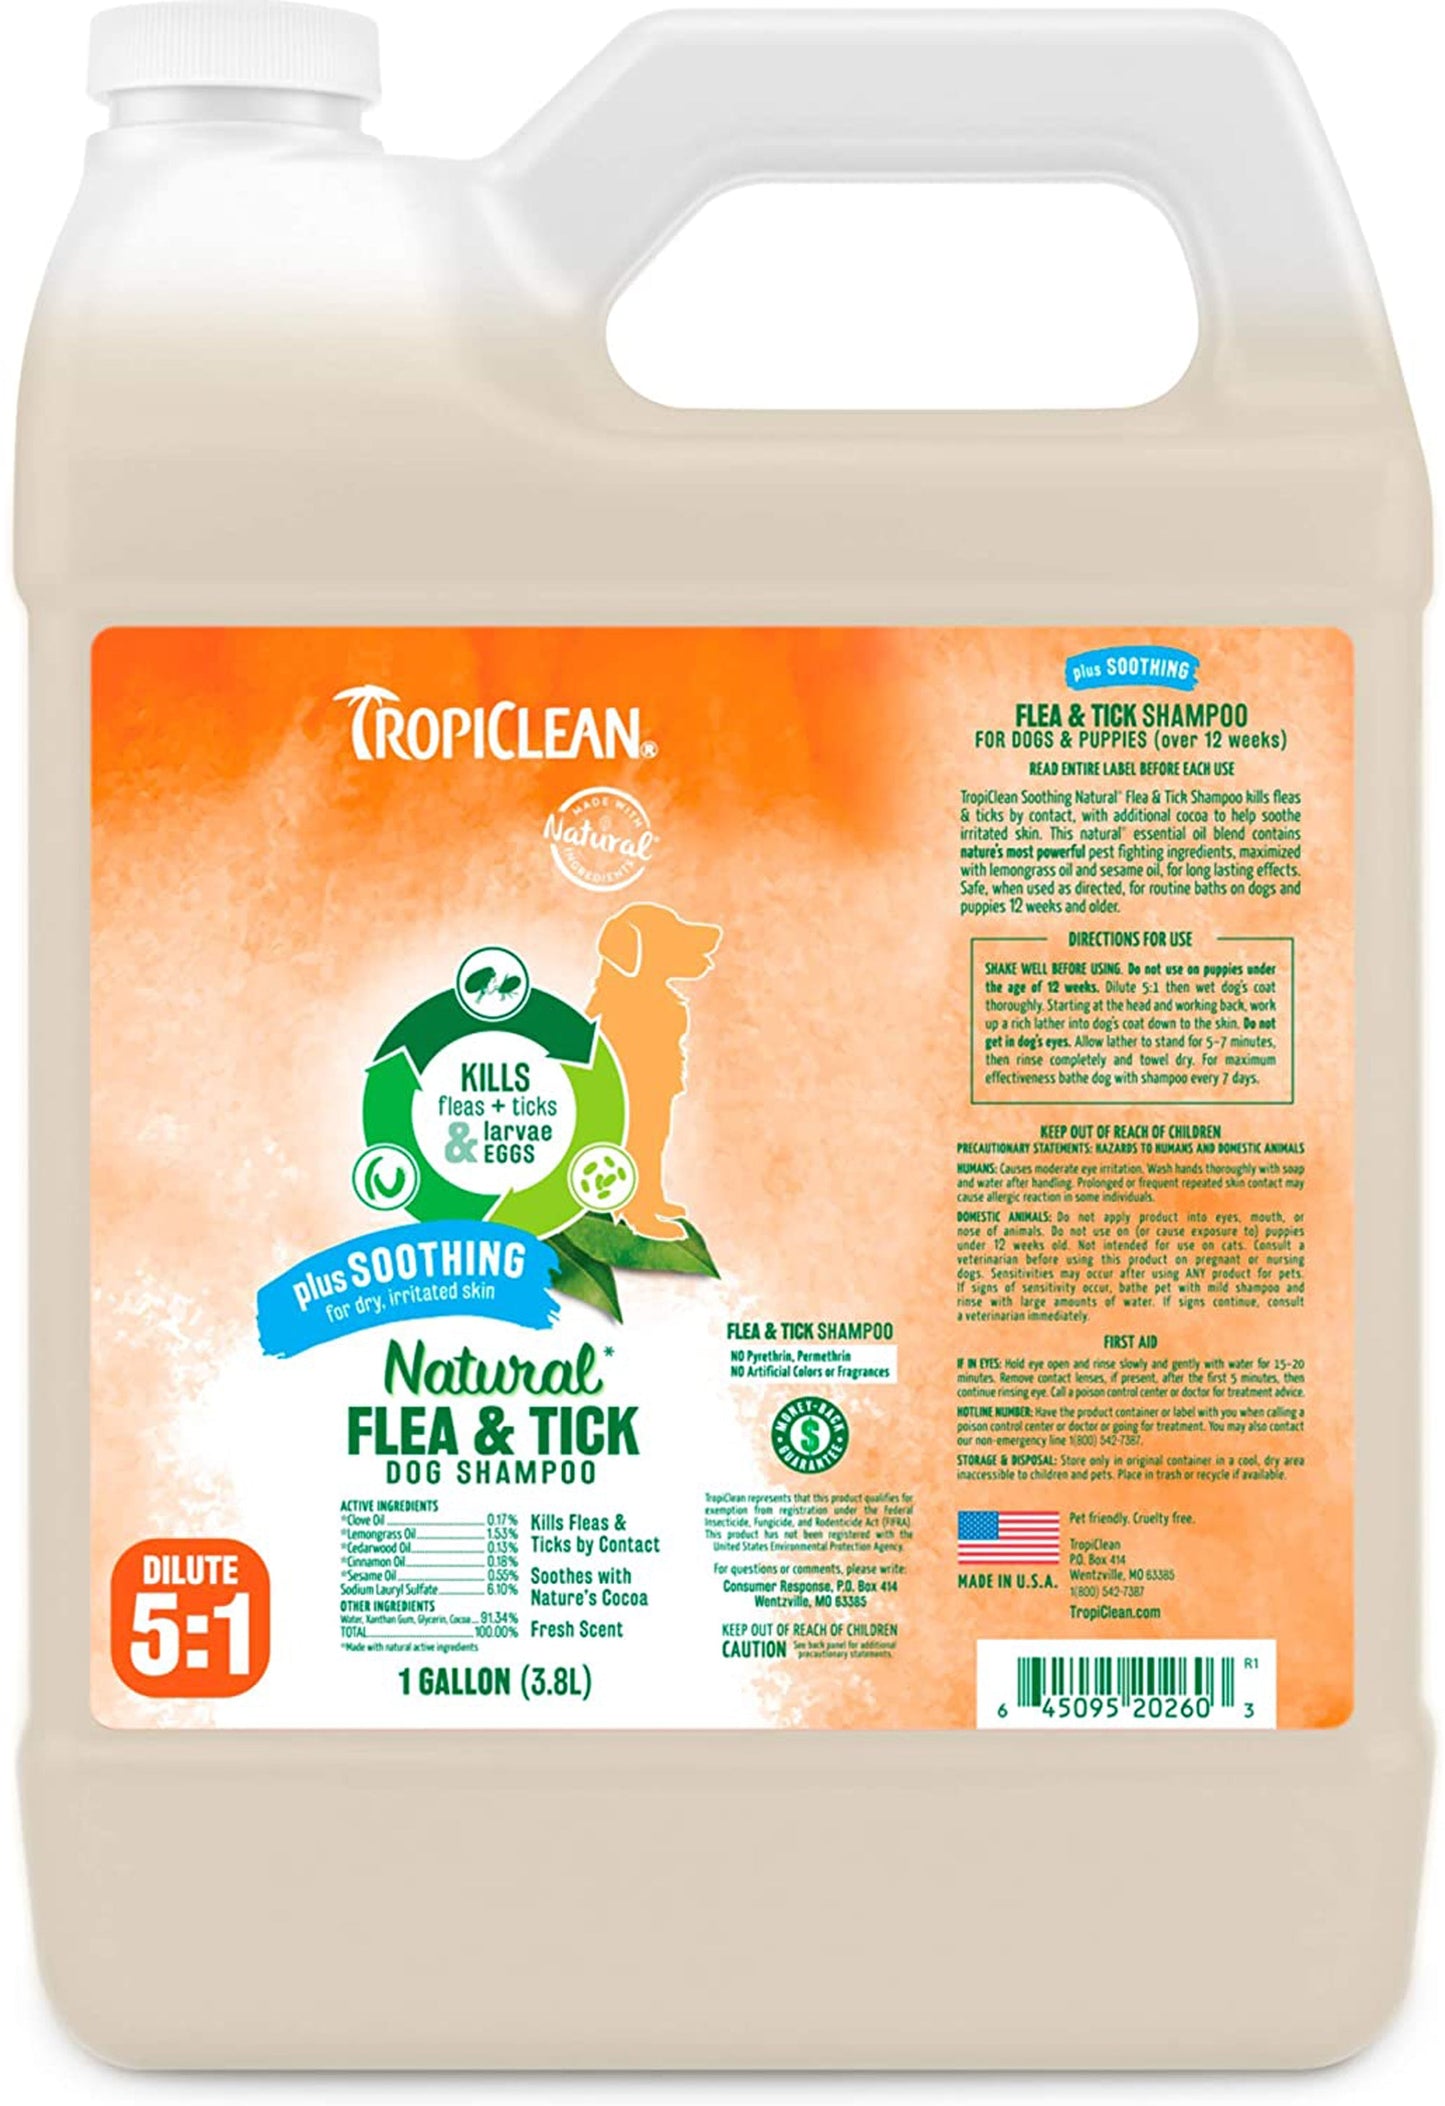 TropiClean Natural Flea & Tick Soothing Shampoo for Dogs 1ea/1 gal